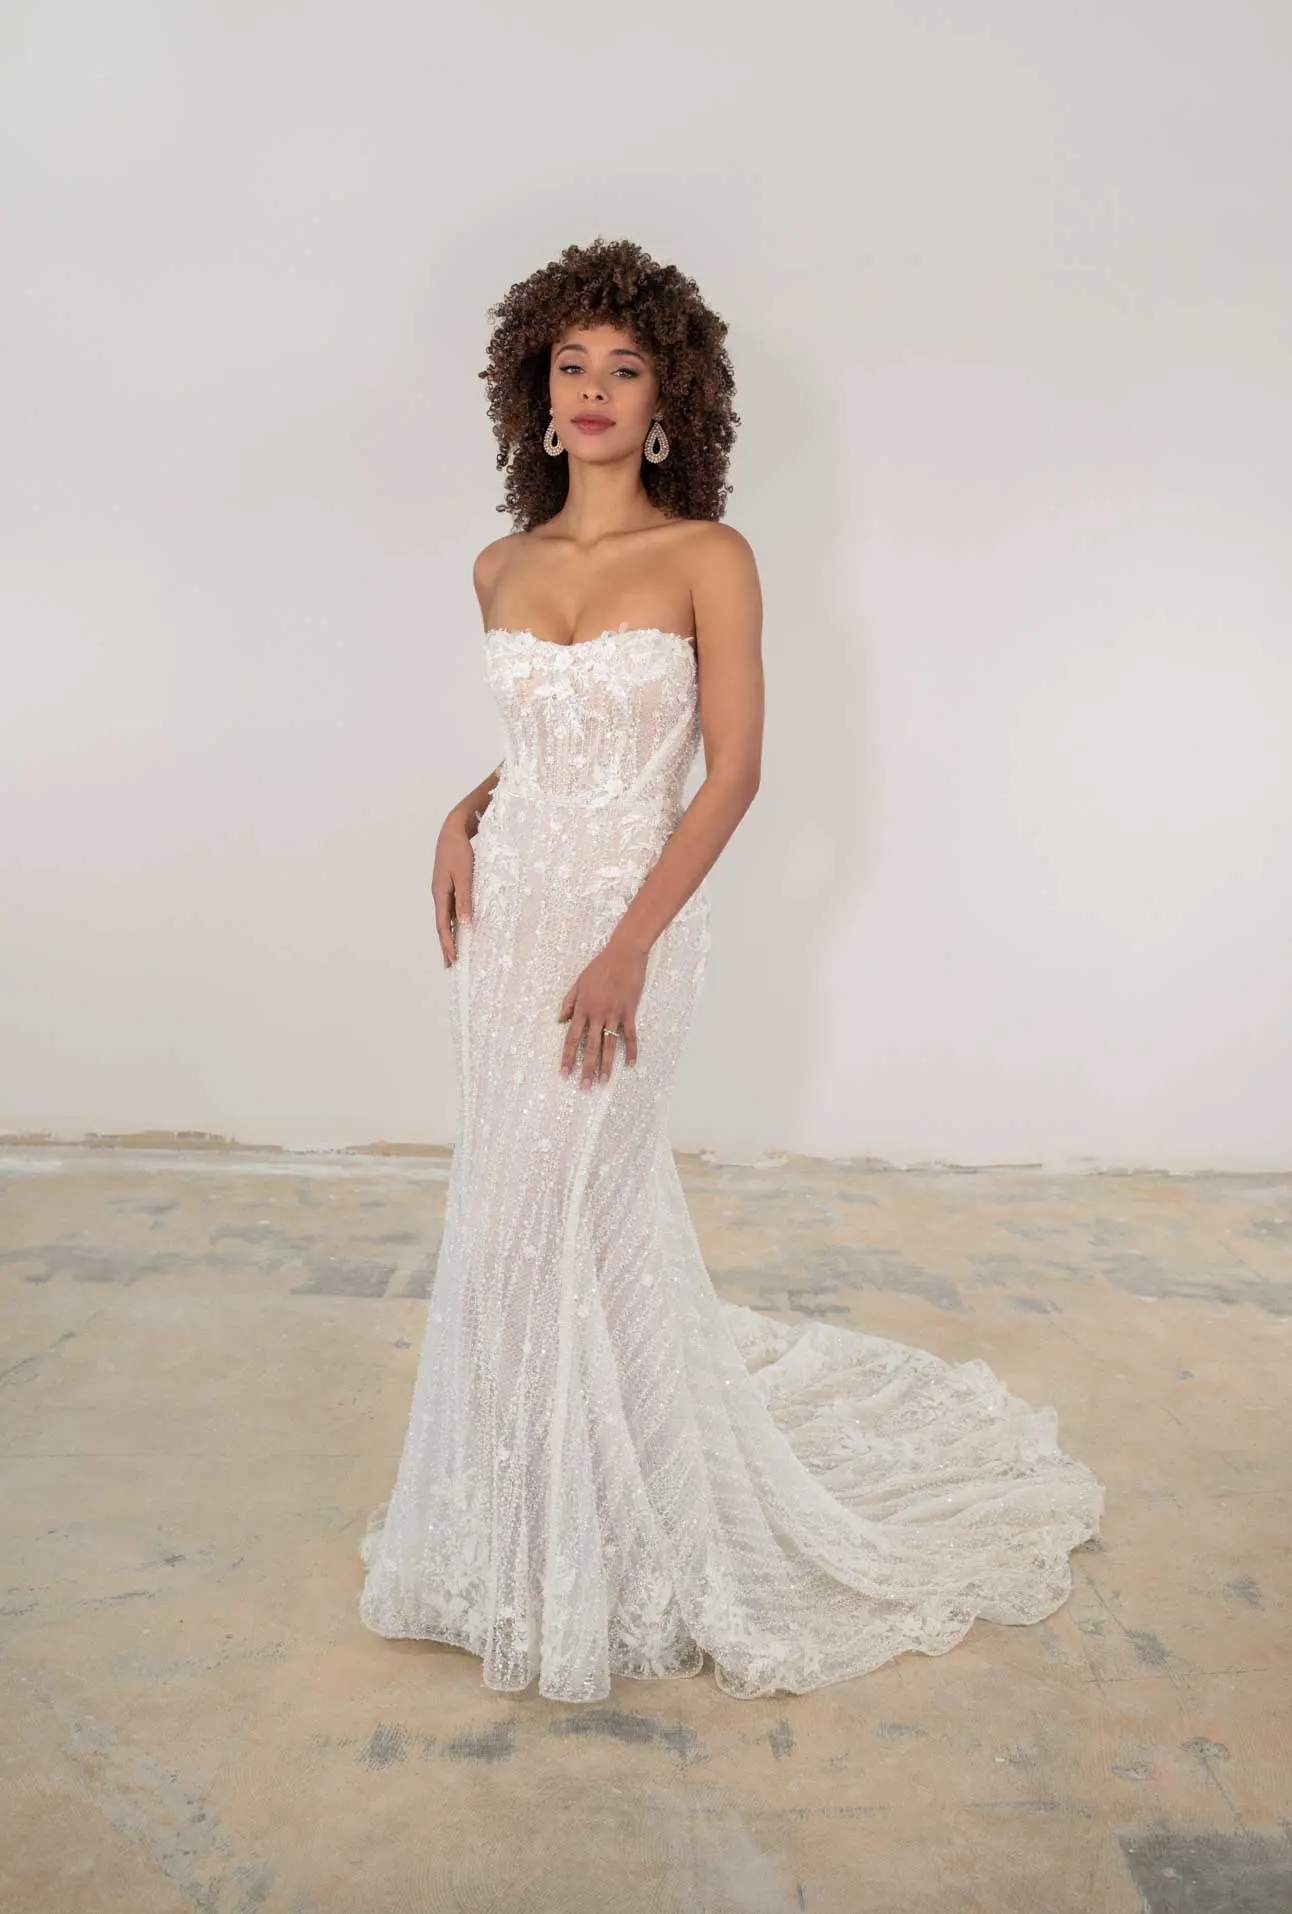 Sexy Couture Beaded Gown With Ruffled Overskirt by Martina Liana Luxe